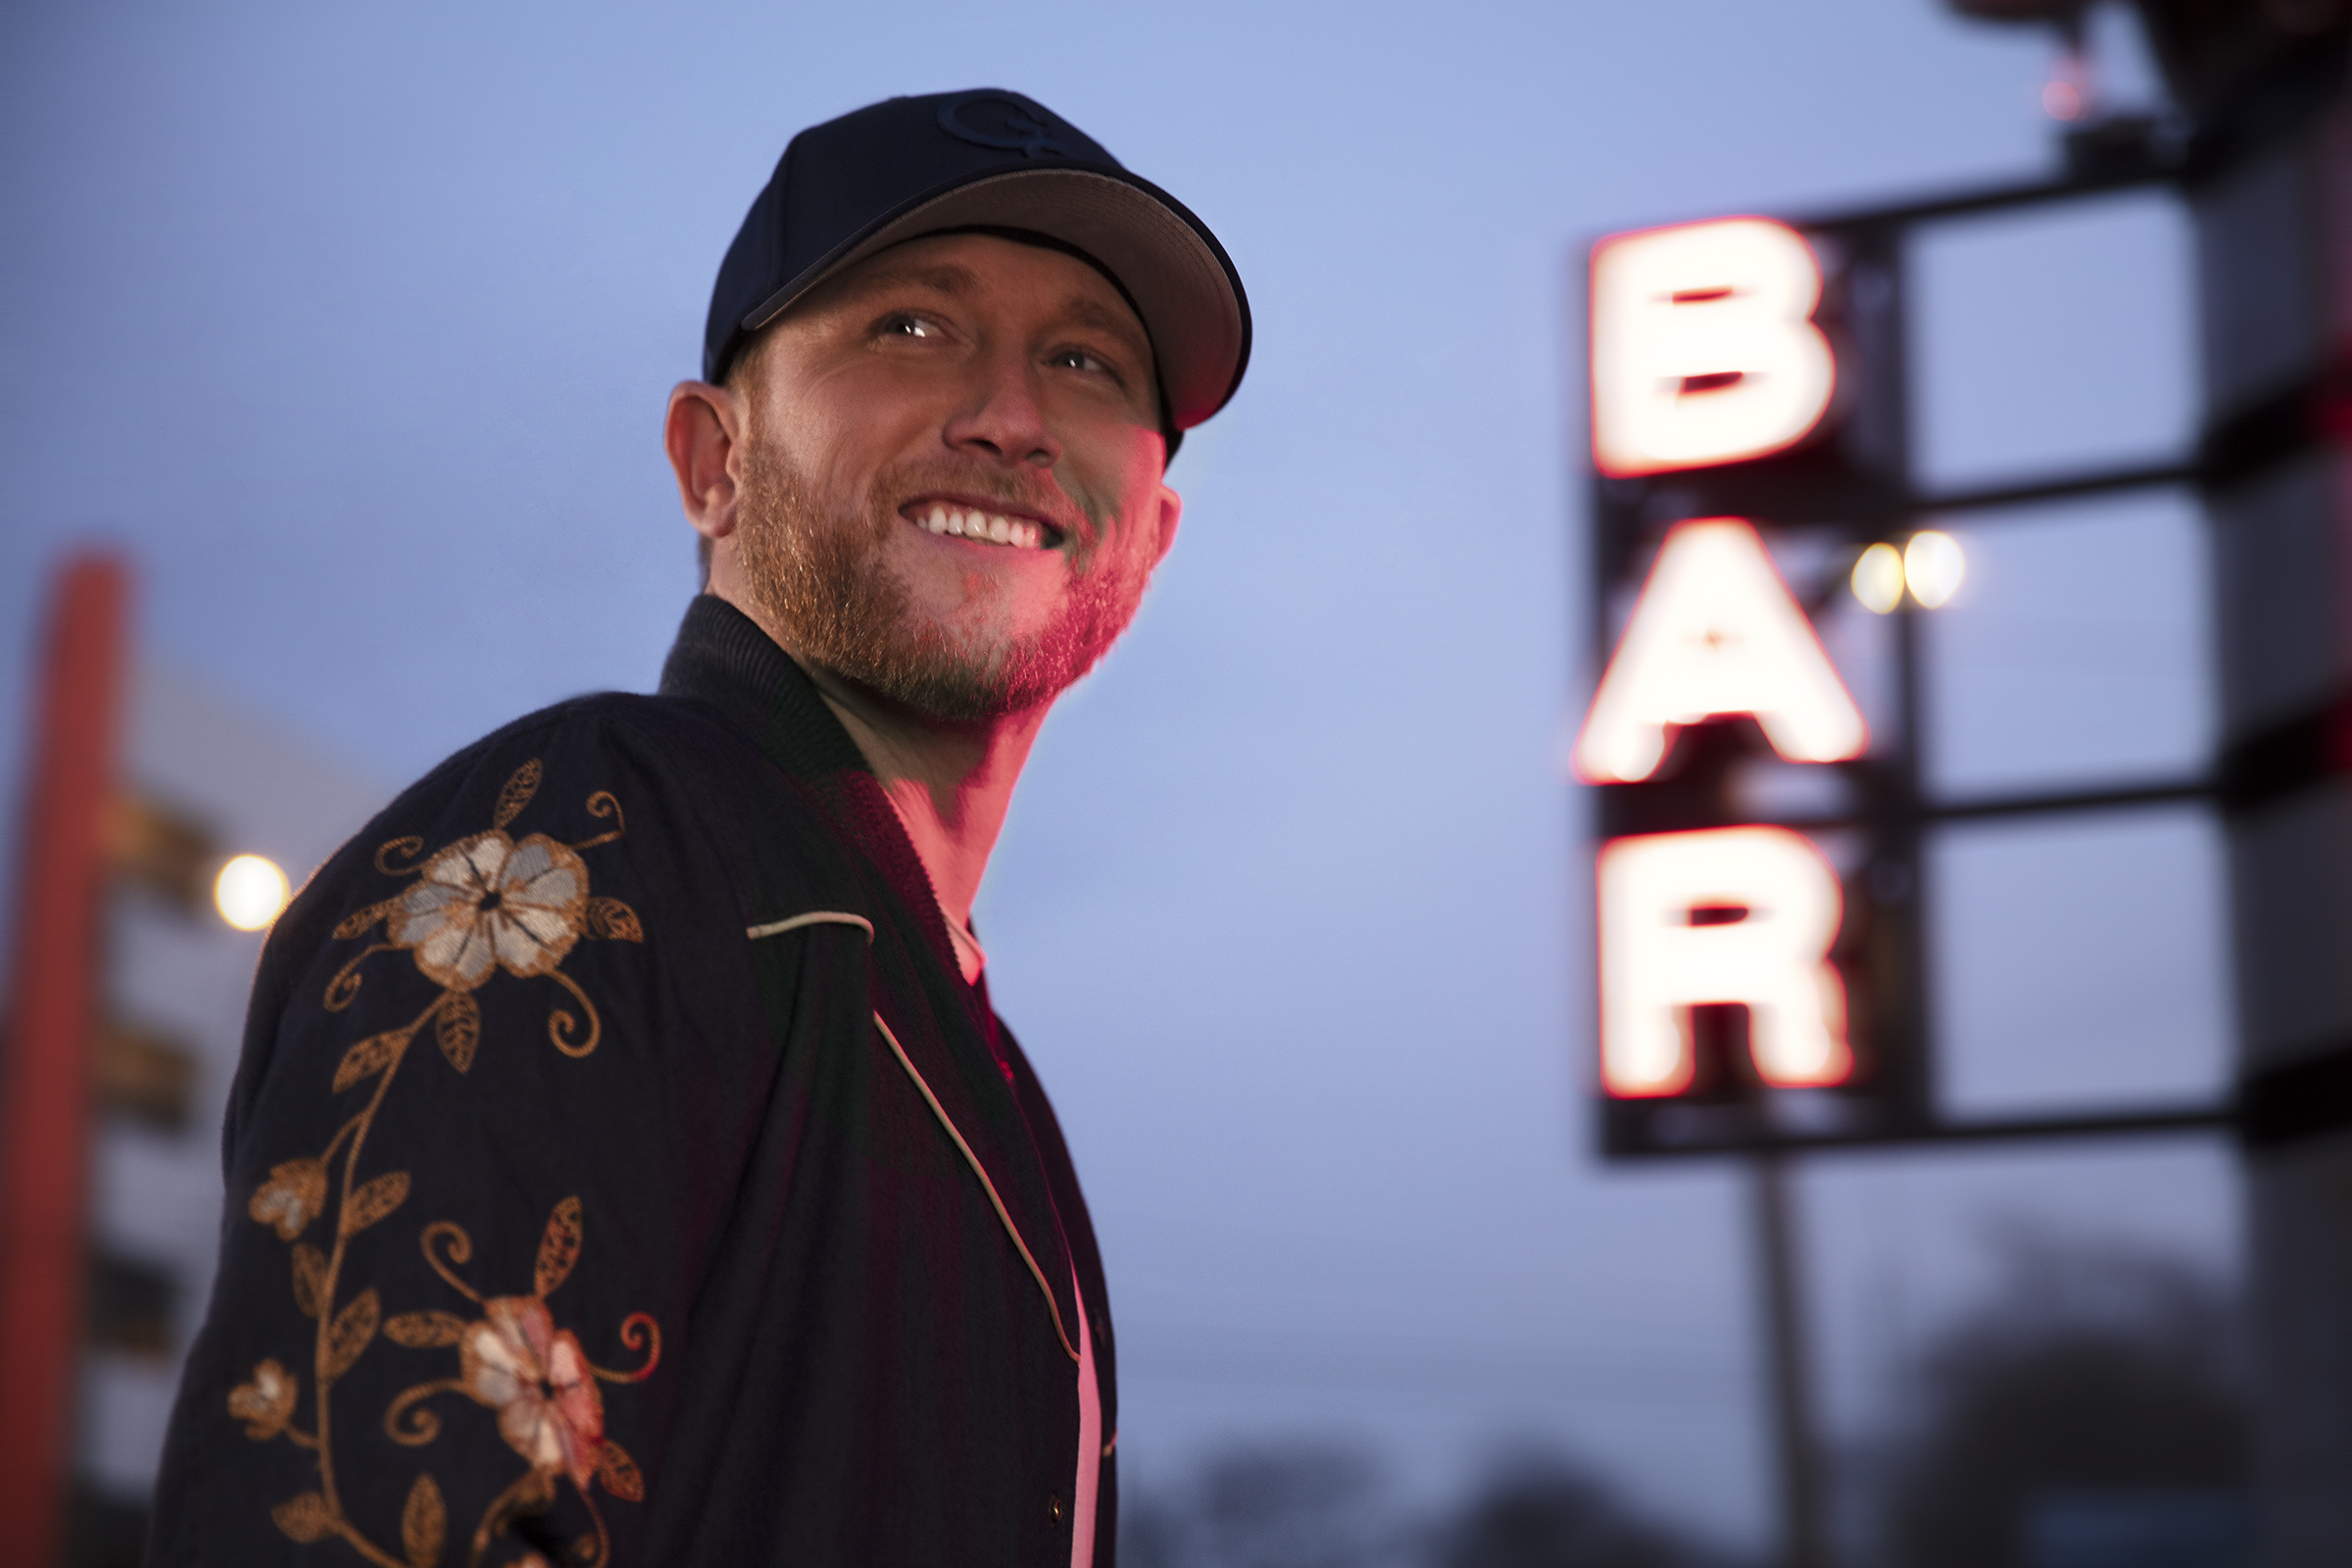 COLE SWINDELL RELEASES NEW SONG FOR HIS FANS TODAY “SINGLE SATURDAY NIGHT”